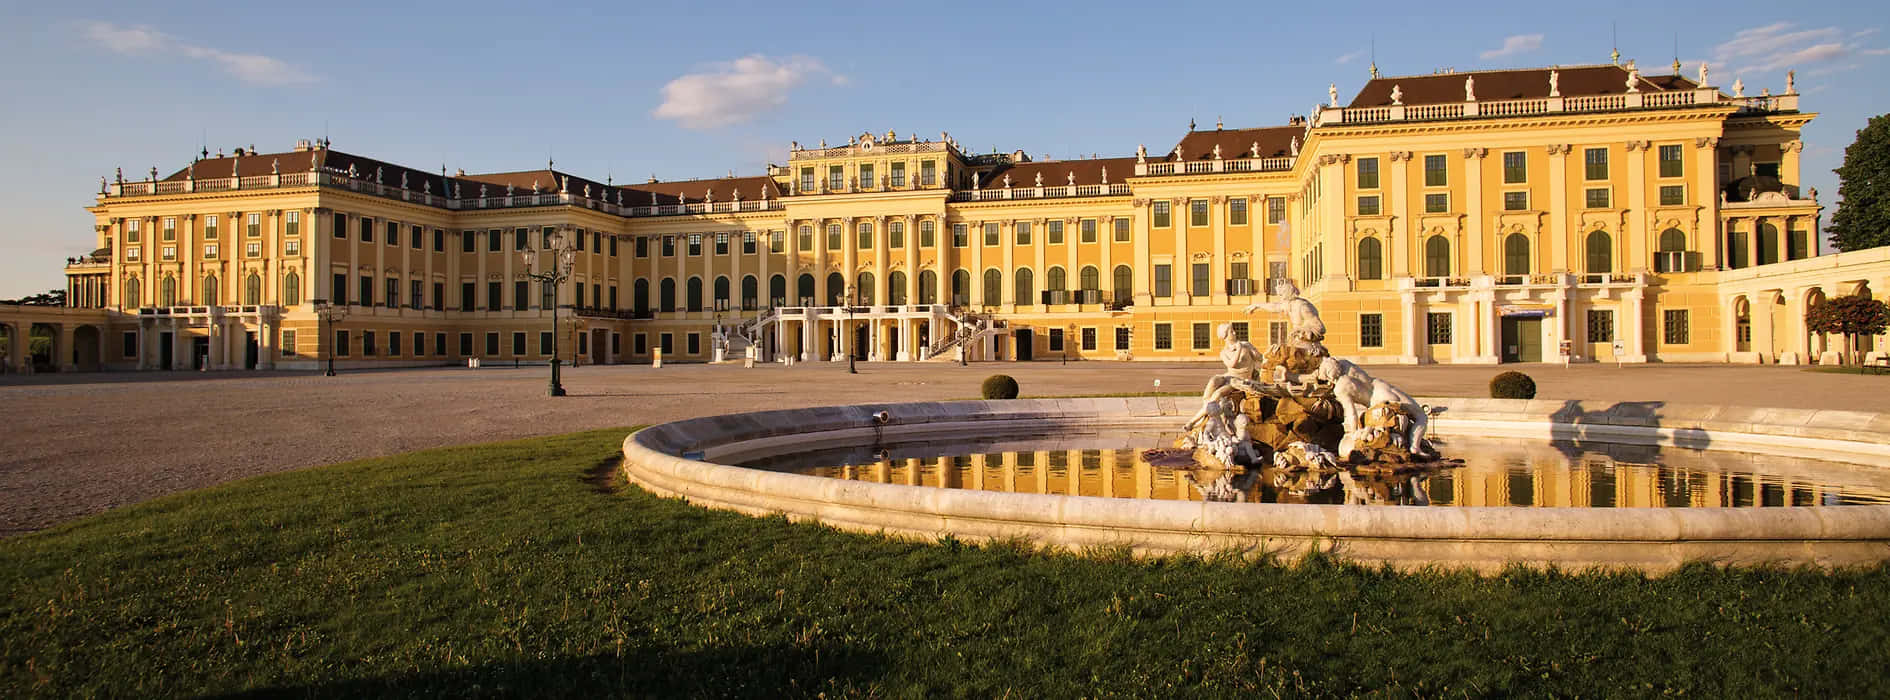 Majestic Schonbrunn Palace In Vienna At Twilight Wallpaper